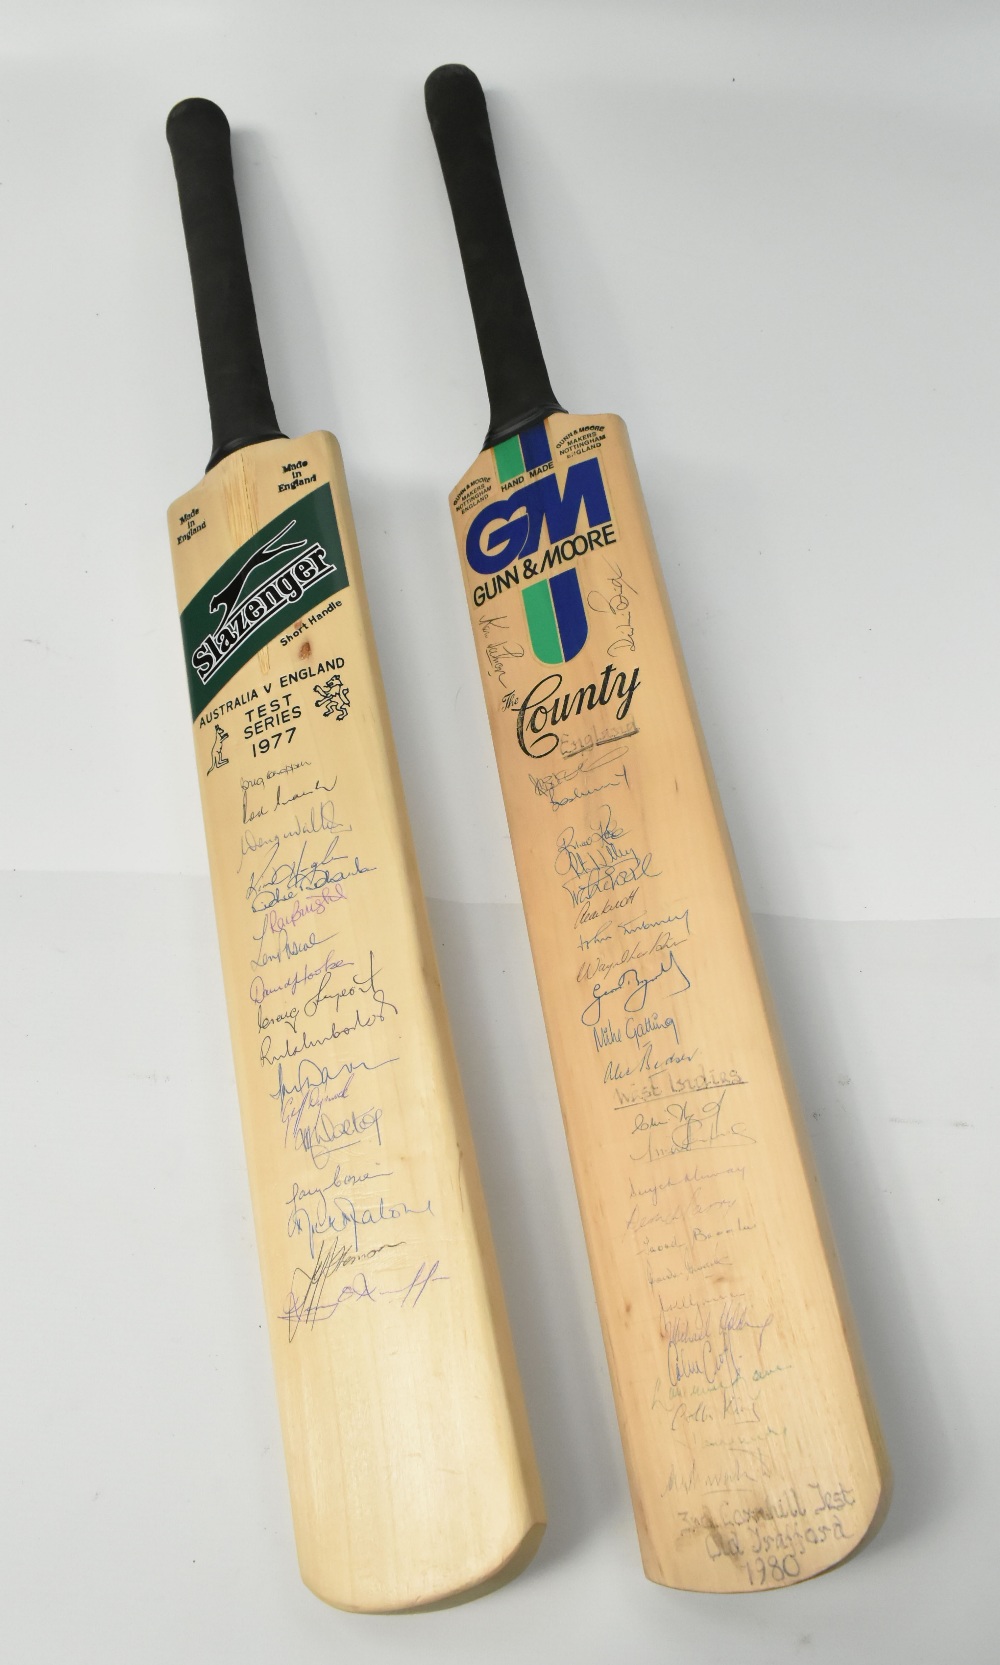 Two signed cricket bats, the first for the Australia V England Test Series 1977 including Ray